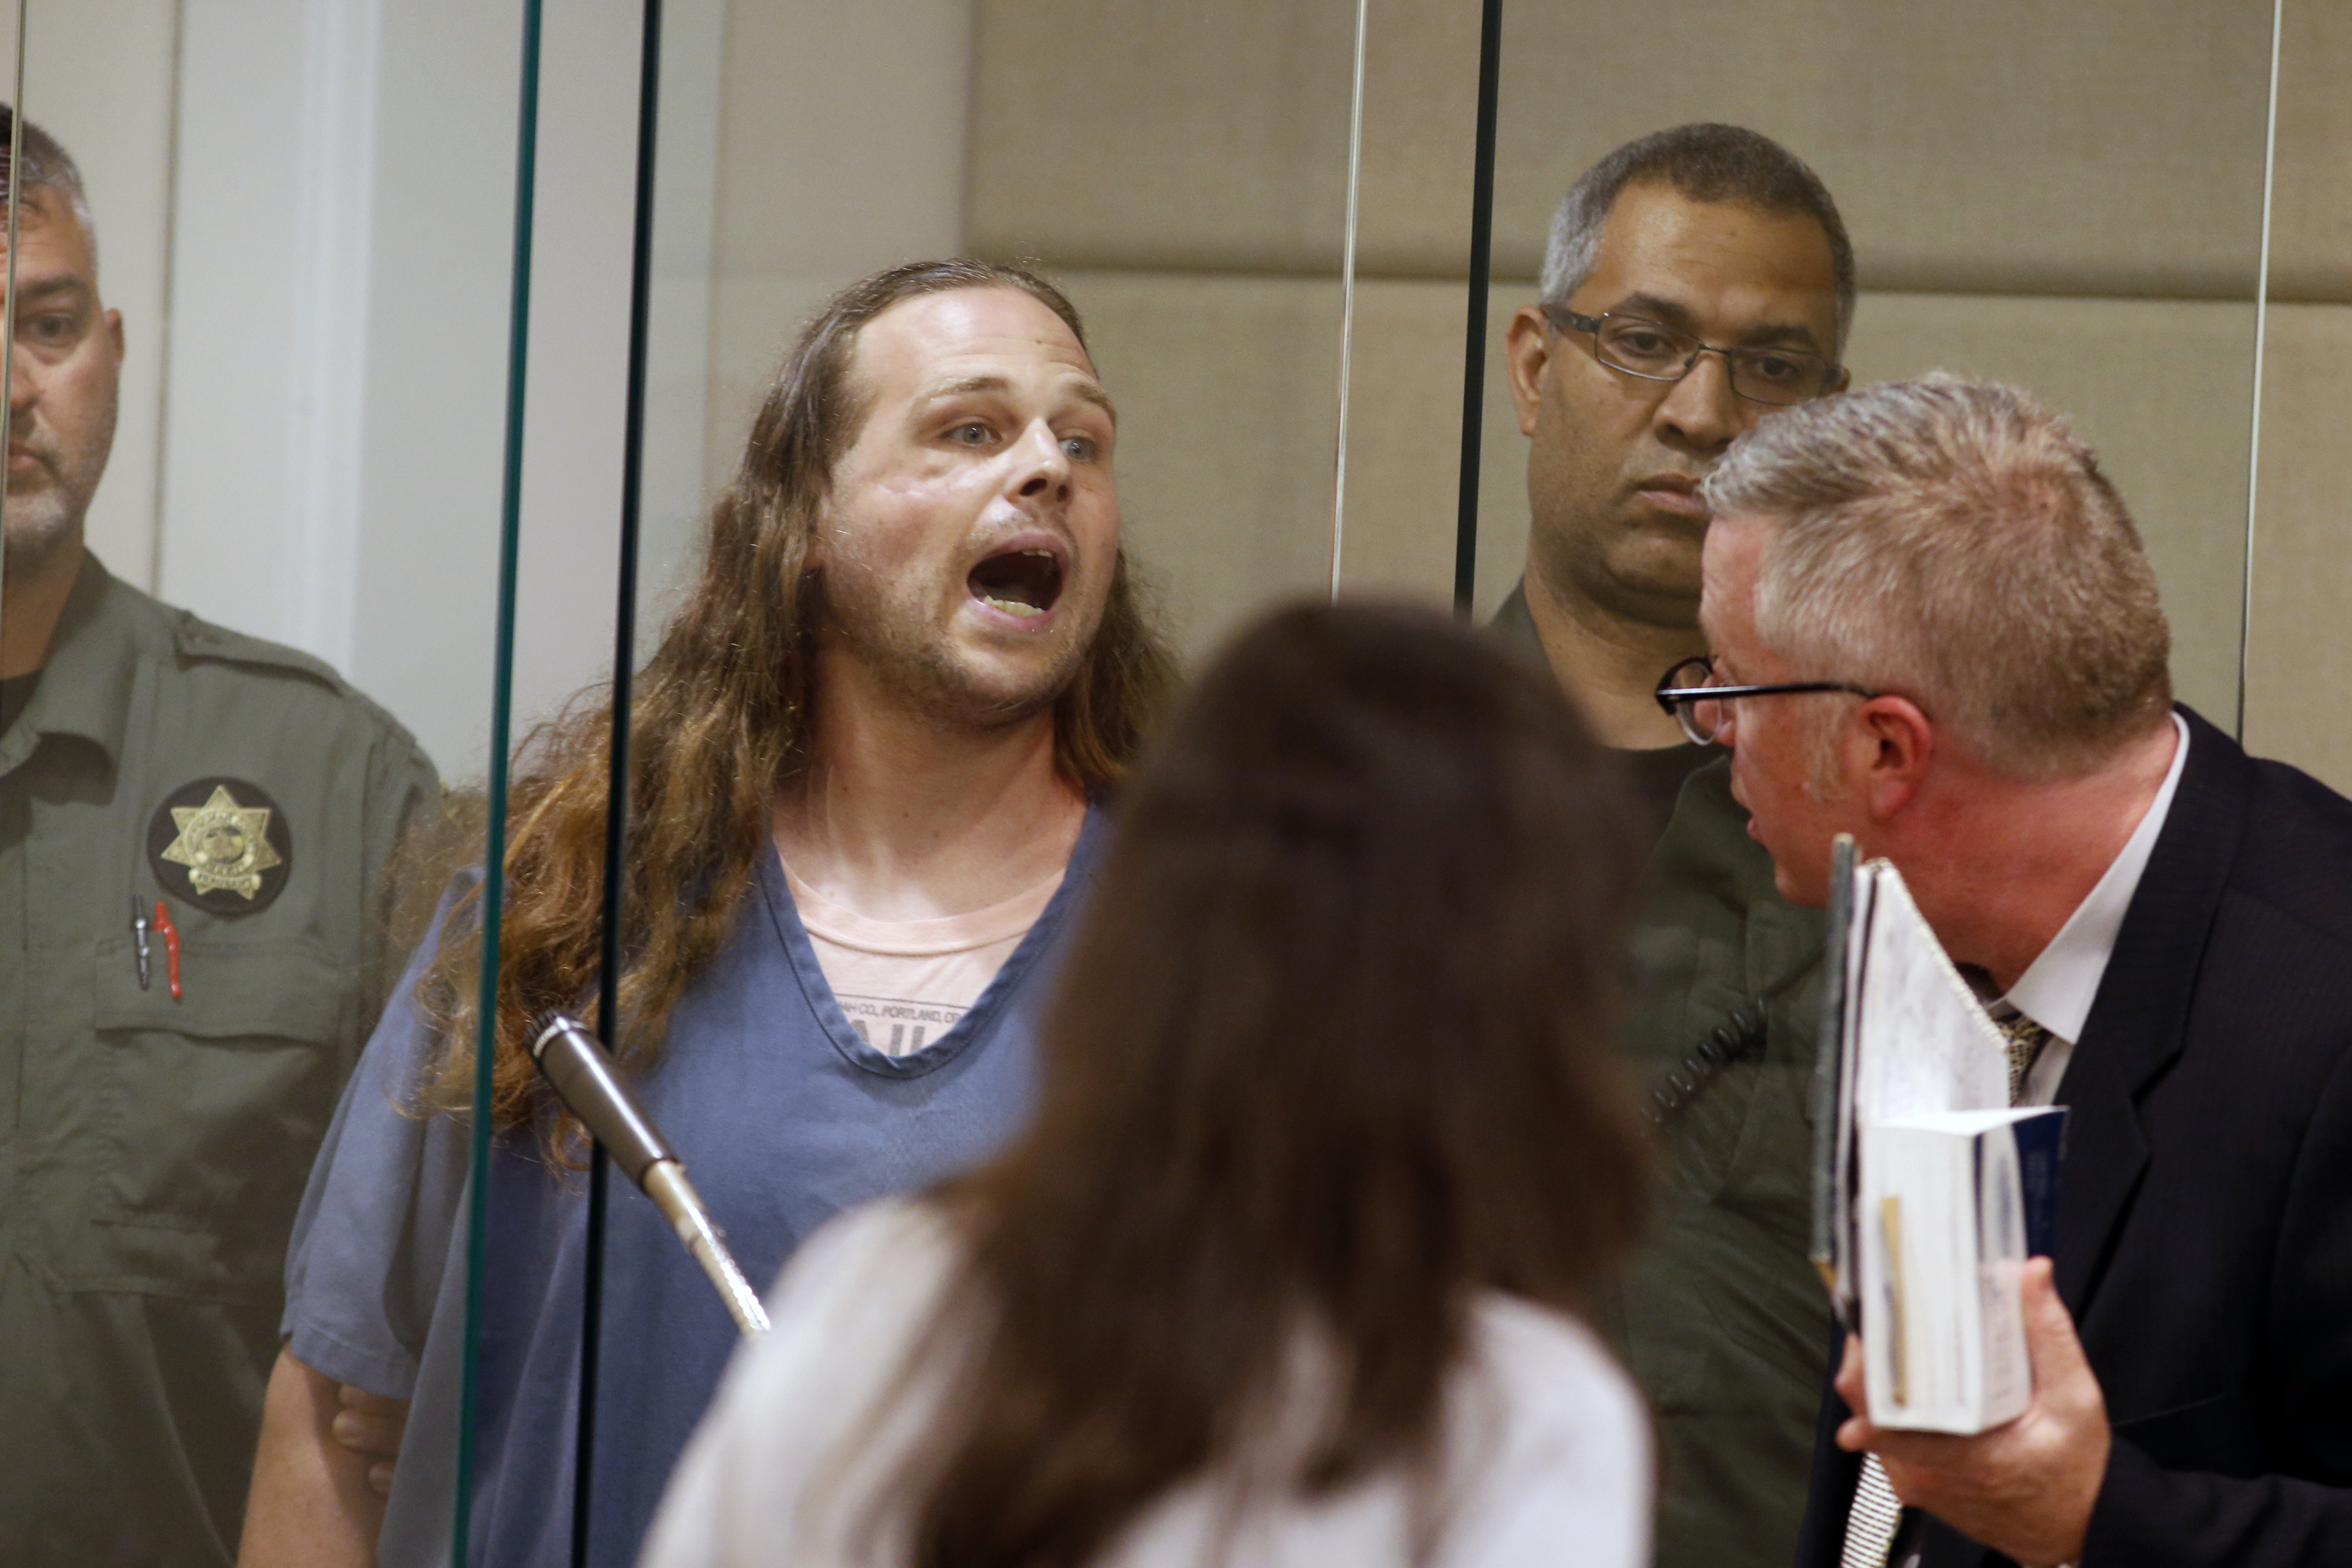 Jeremy Joseph Christian shouts as he is arraigned in Multnomah County Circuit Court in Portland, Ore., Tuesday, May 30, 2017. Authorities say Christian started verbally abusing two young women, including one wearing a hijab. When three men on the train intervened, police say, Christian attacked them, killing two and wounding one. (Beth Nakamura—AP)